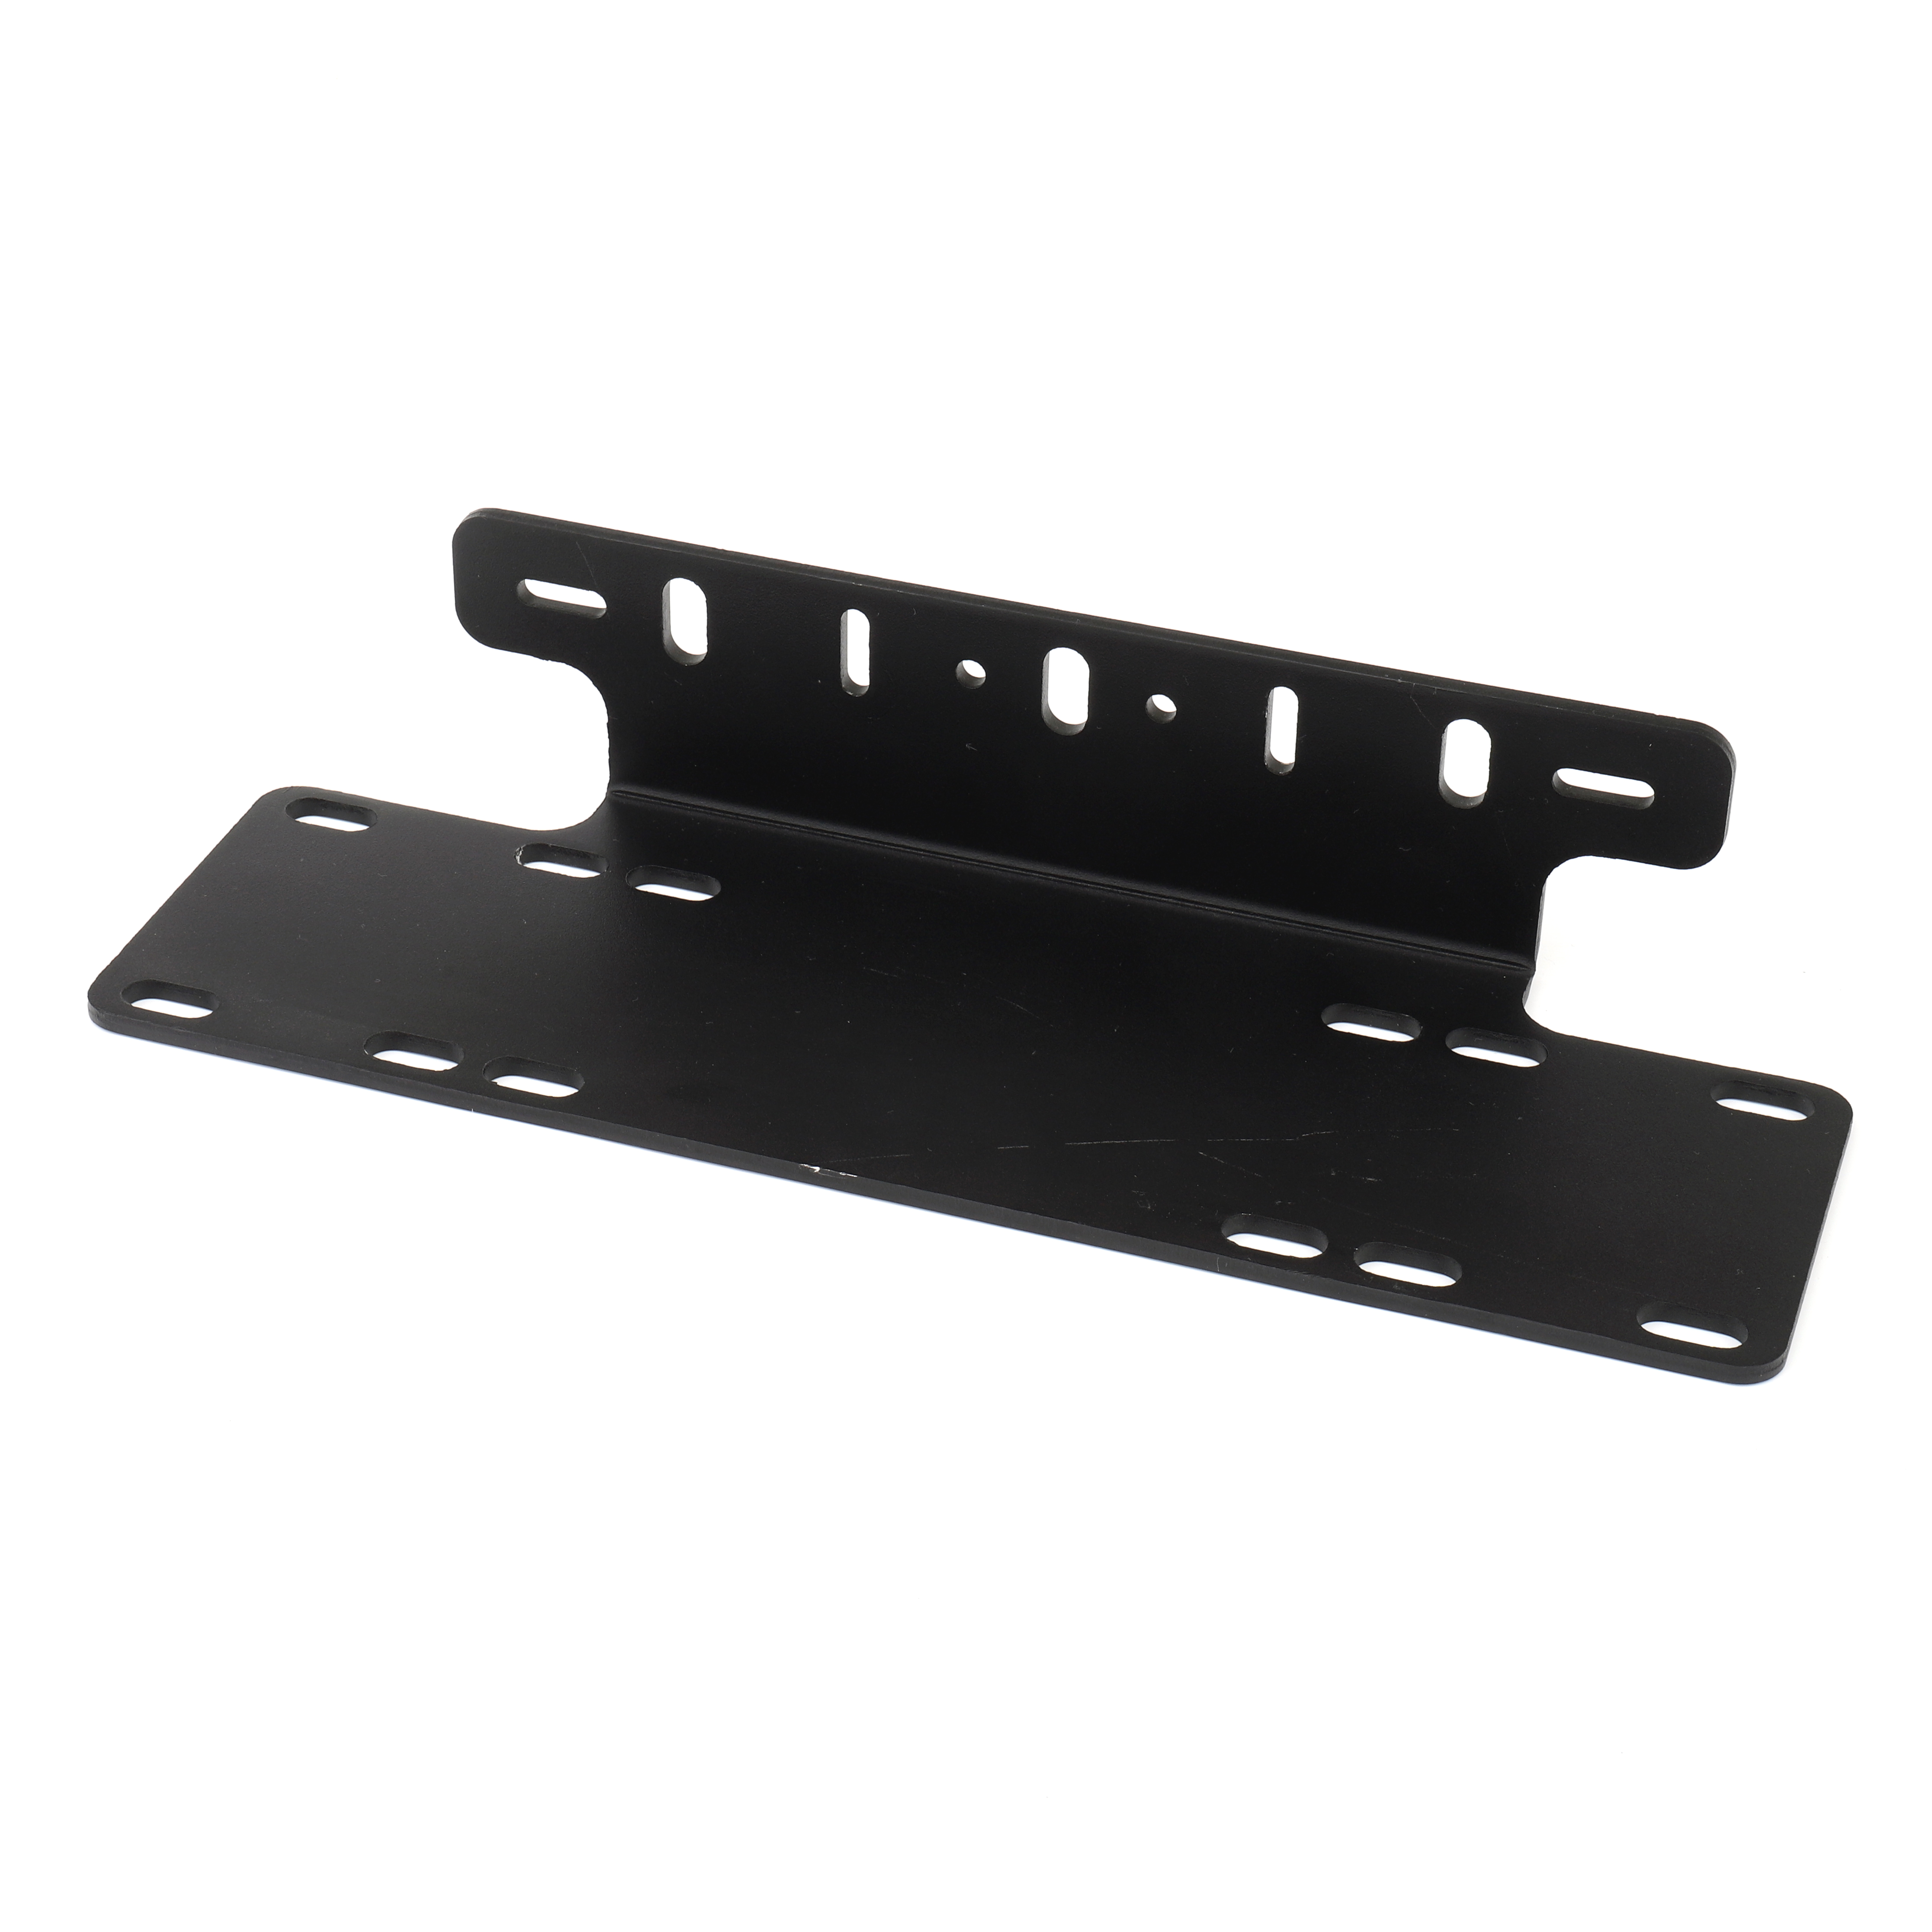 License Plate Mounting Brackets for Offroad Led Light